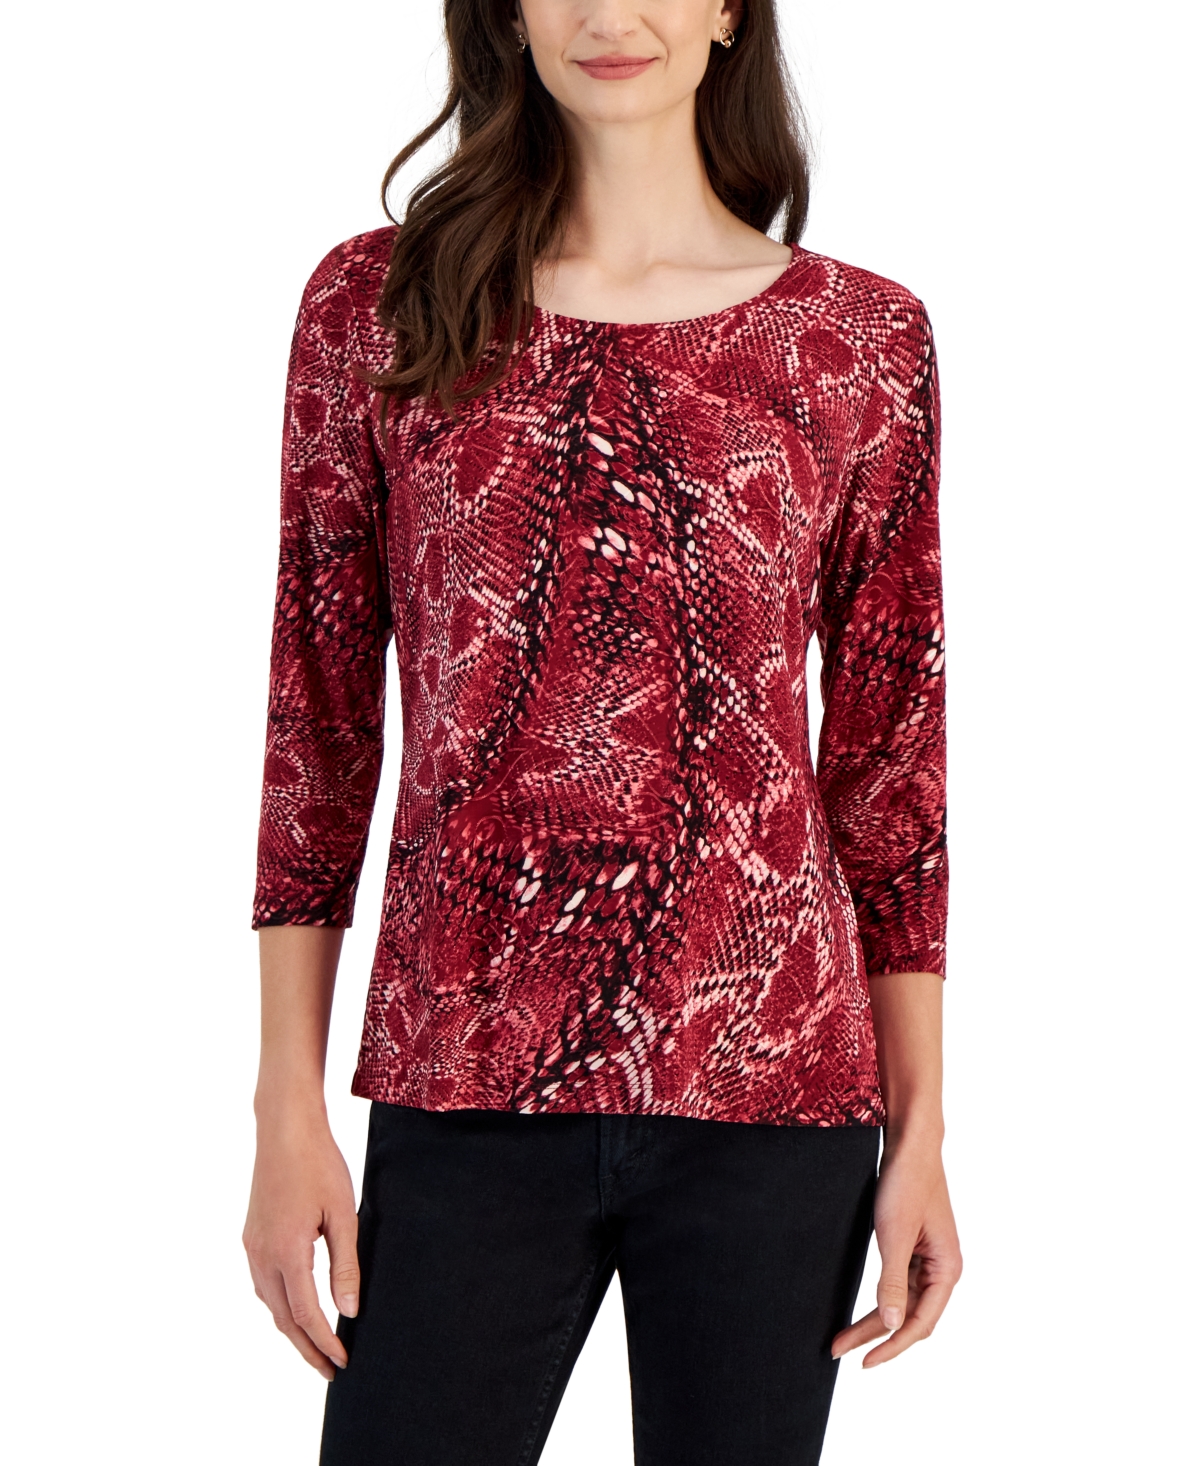 Jm Collection Petite Warped Snake Jacquard Top, Created For Macy's In ...